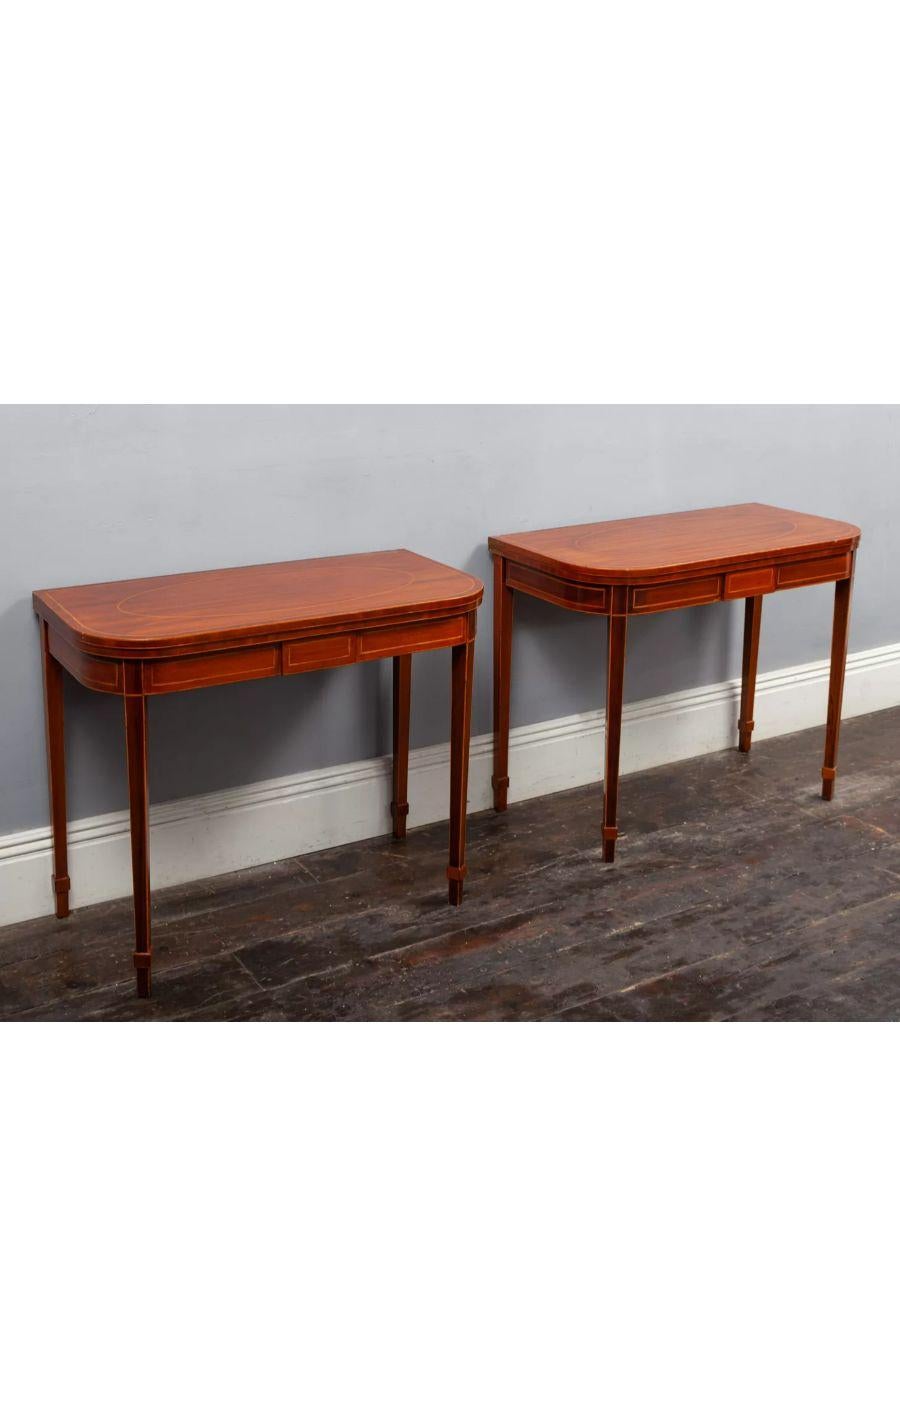 A pair of George III Sheraton period inlaid mahogany tea tables.

The tables are made from richly coloured mahogany with fine inlaid boxwood stringing.

The ‘D’ shaped hinged tops rest on twin gate supports with square tapering legs.

A great